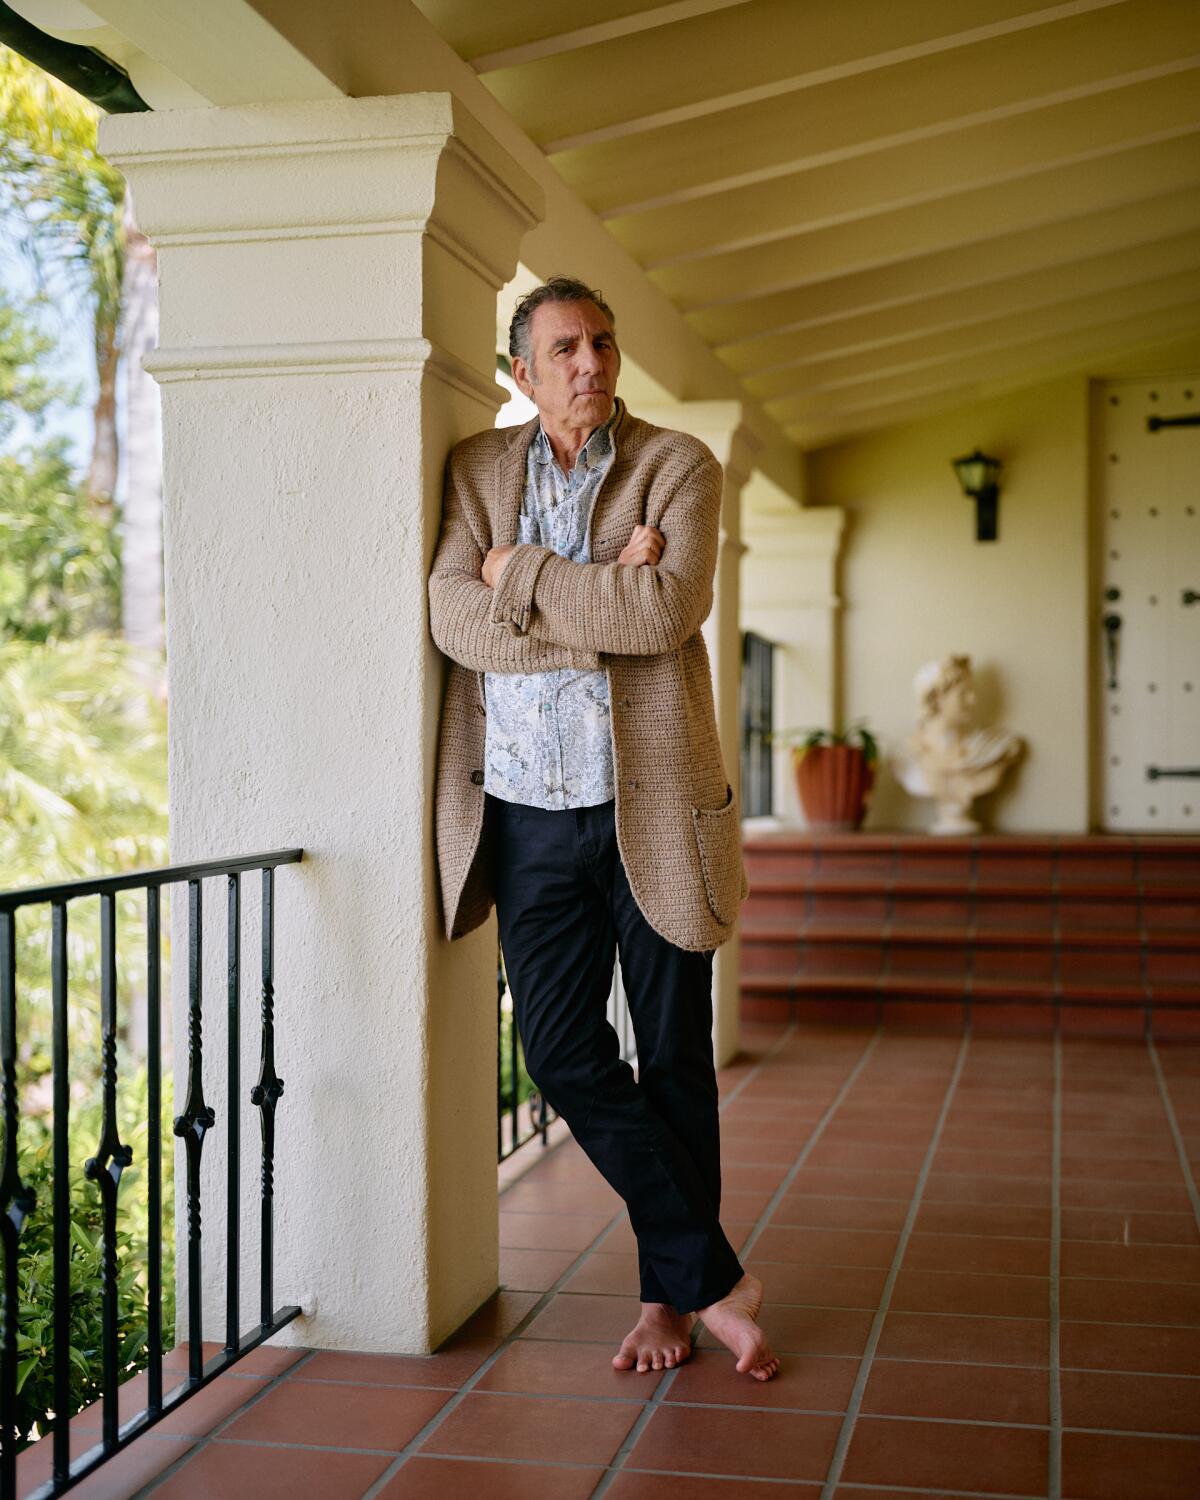 Michael Richards, barefoot and wearing a tan jacket and jeans, leans against a pillar.